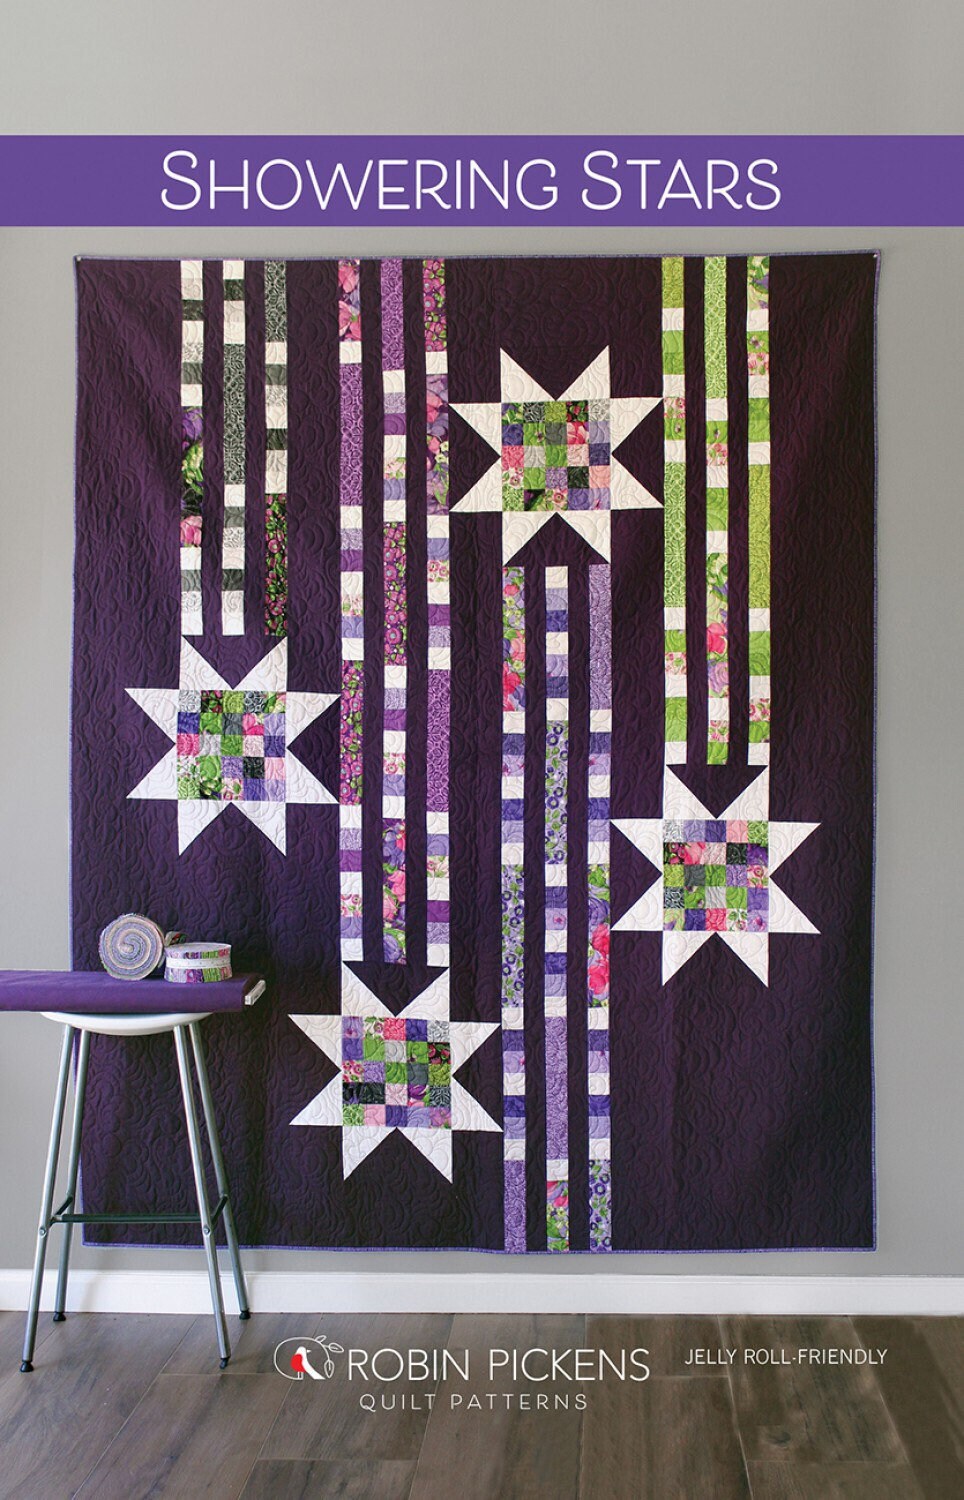 Showering Stars Quilt Pattern - Robin Pickens - Jelly Roll Friendly - 75” x 90”